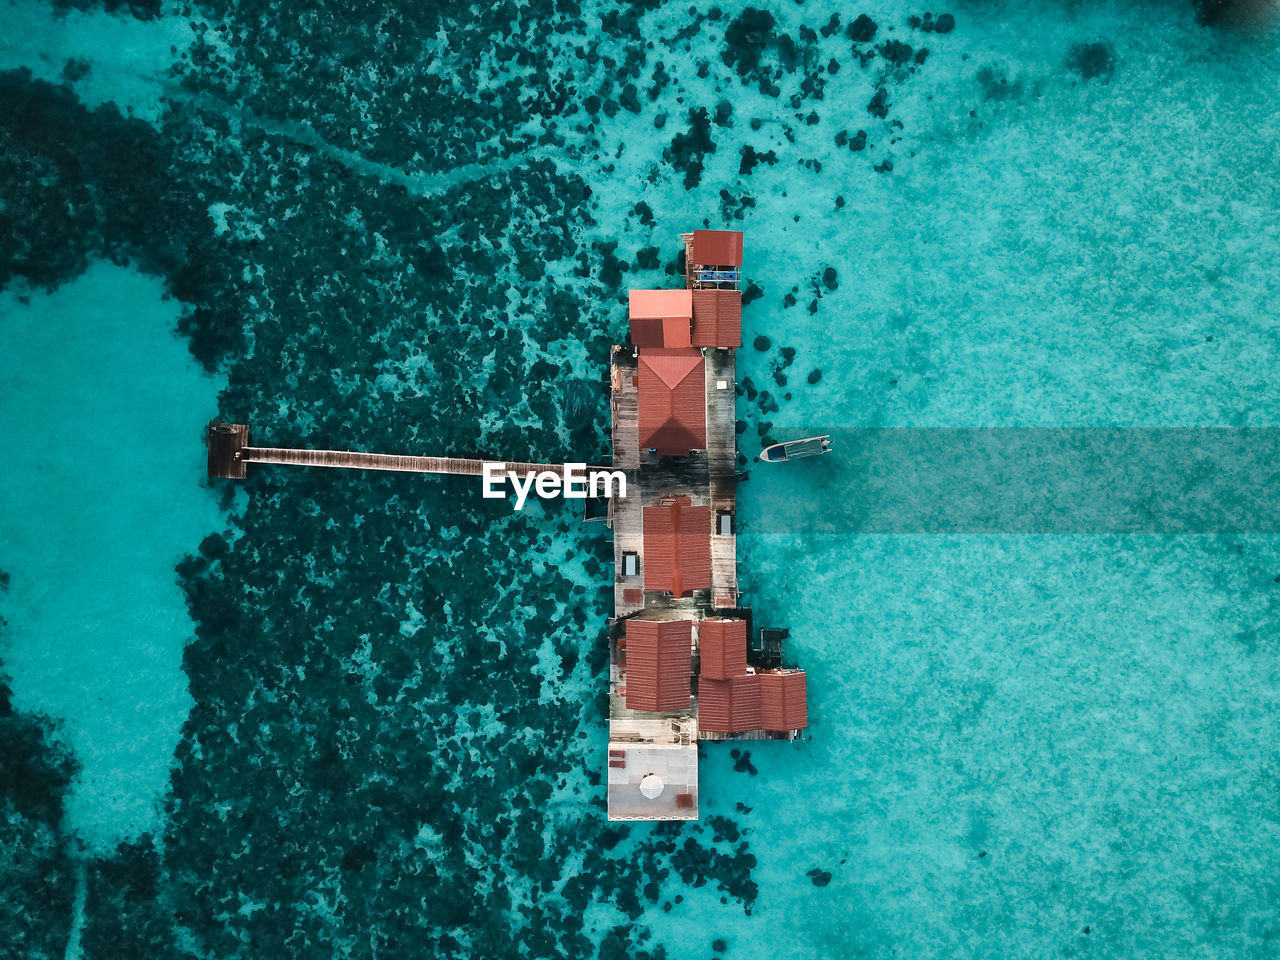 Aerial view of water chalet resort in bum bum island in semporna, sabah, malaysia.